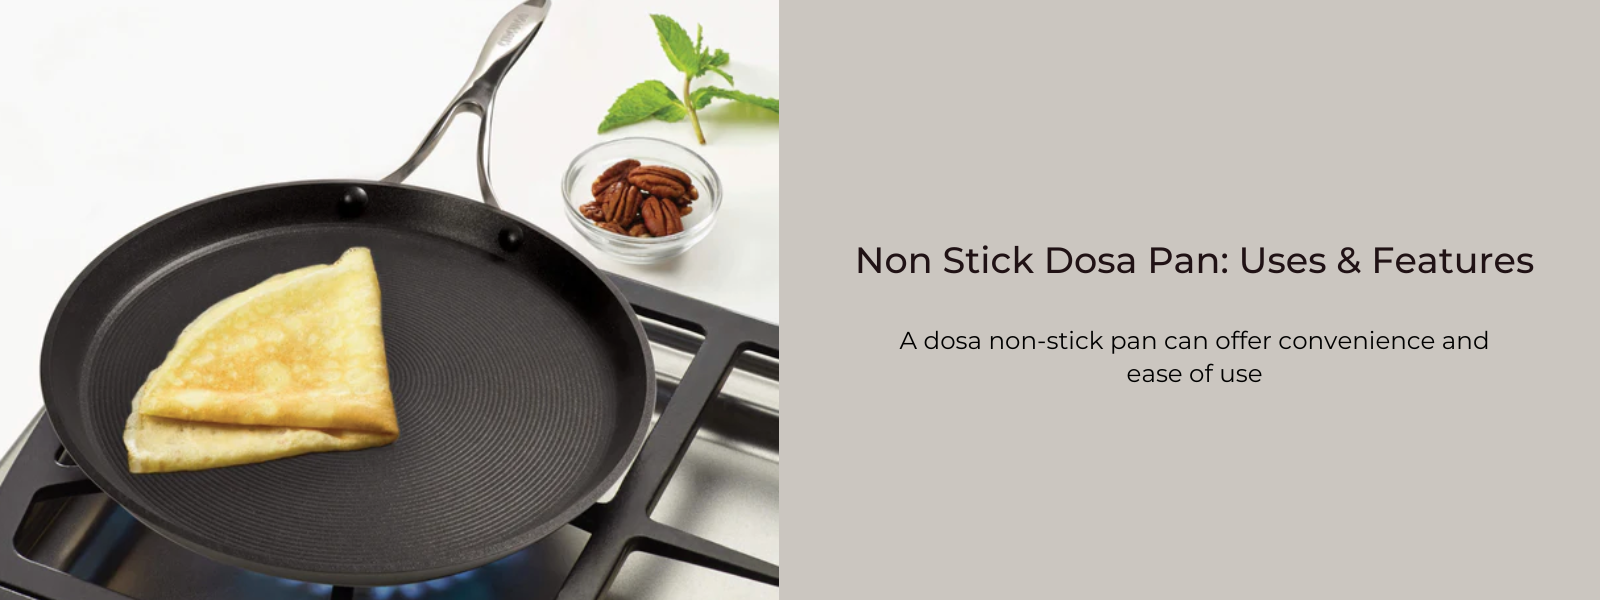 Dosa Non Stick Pan: Important Facts, Uses & Benefits